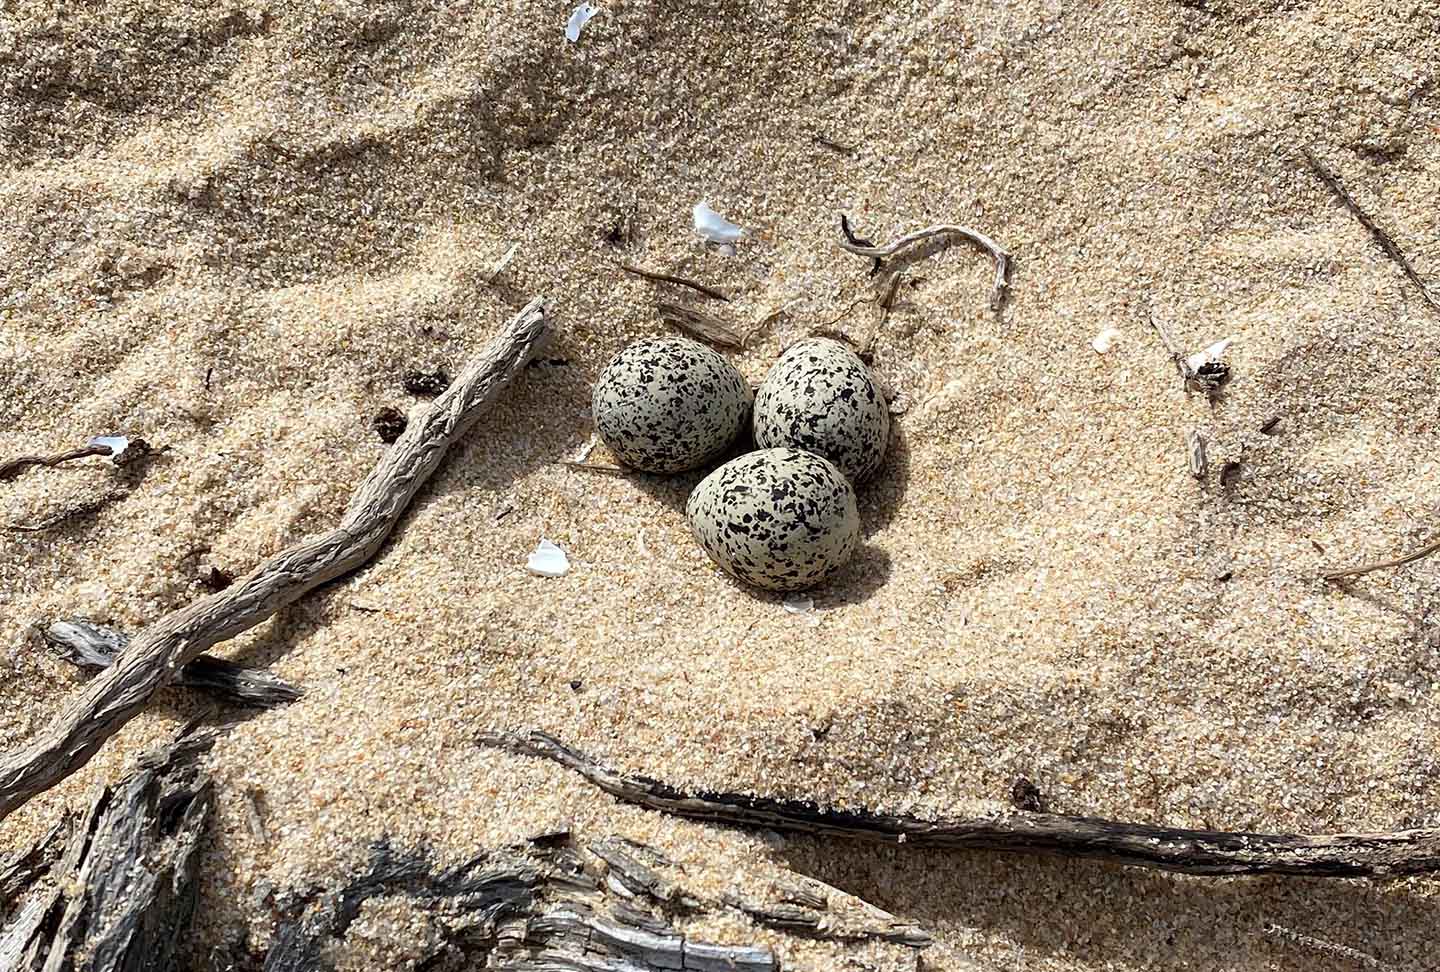 The first hooded plover nest of the 2020 season with three speckled eggs on a beach in the Mornington Peninsula National Park